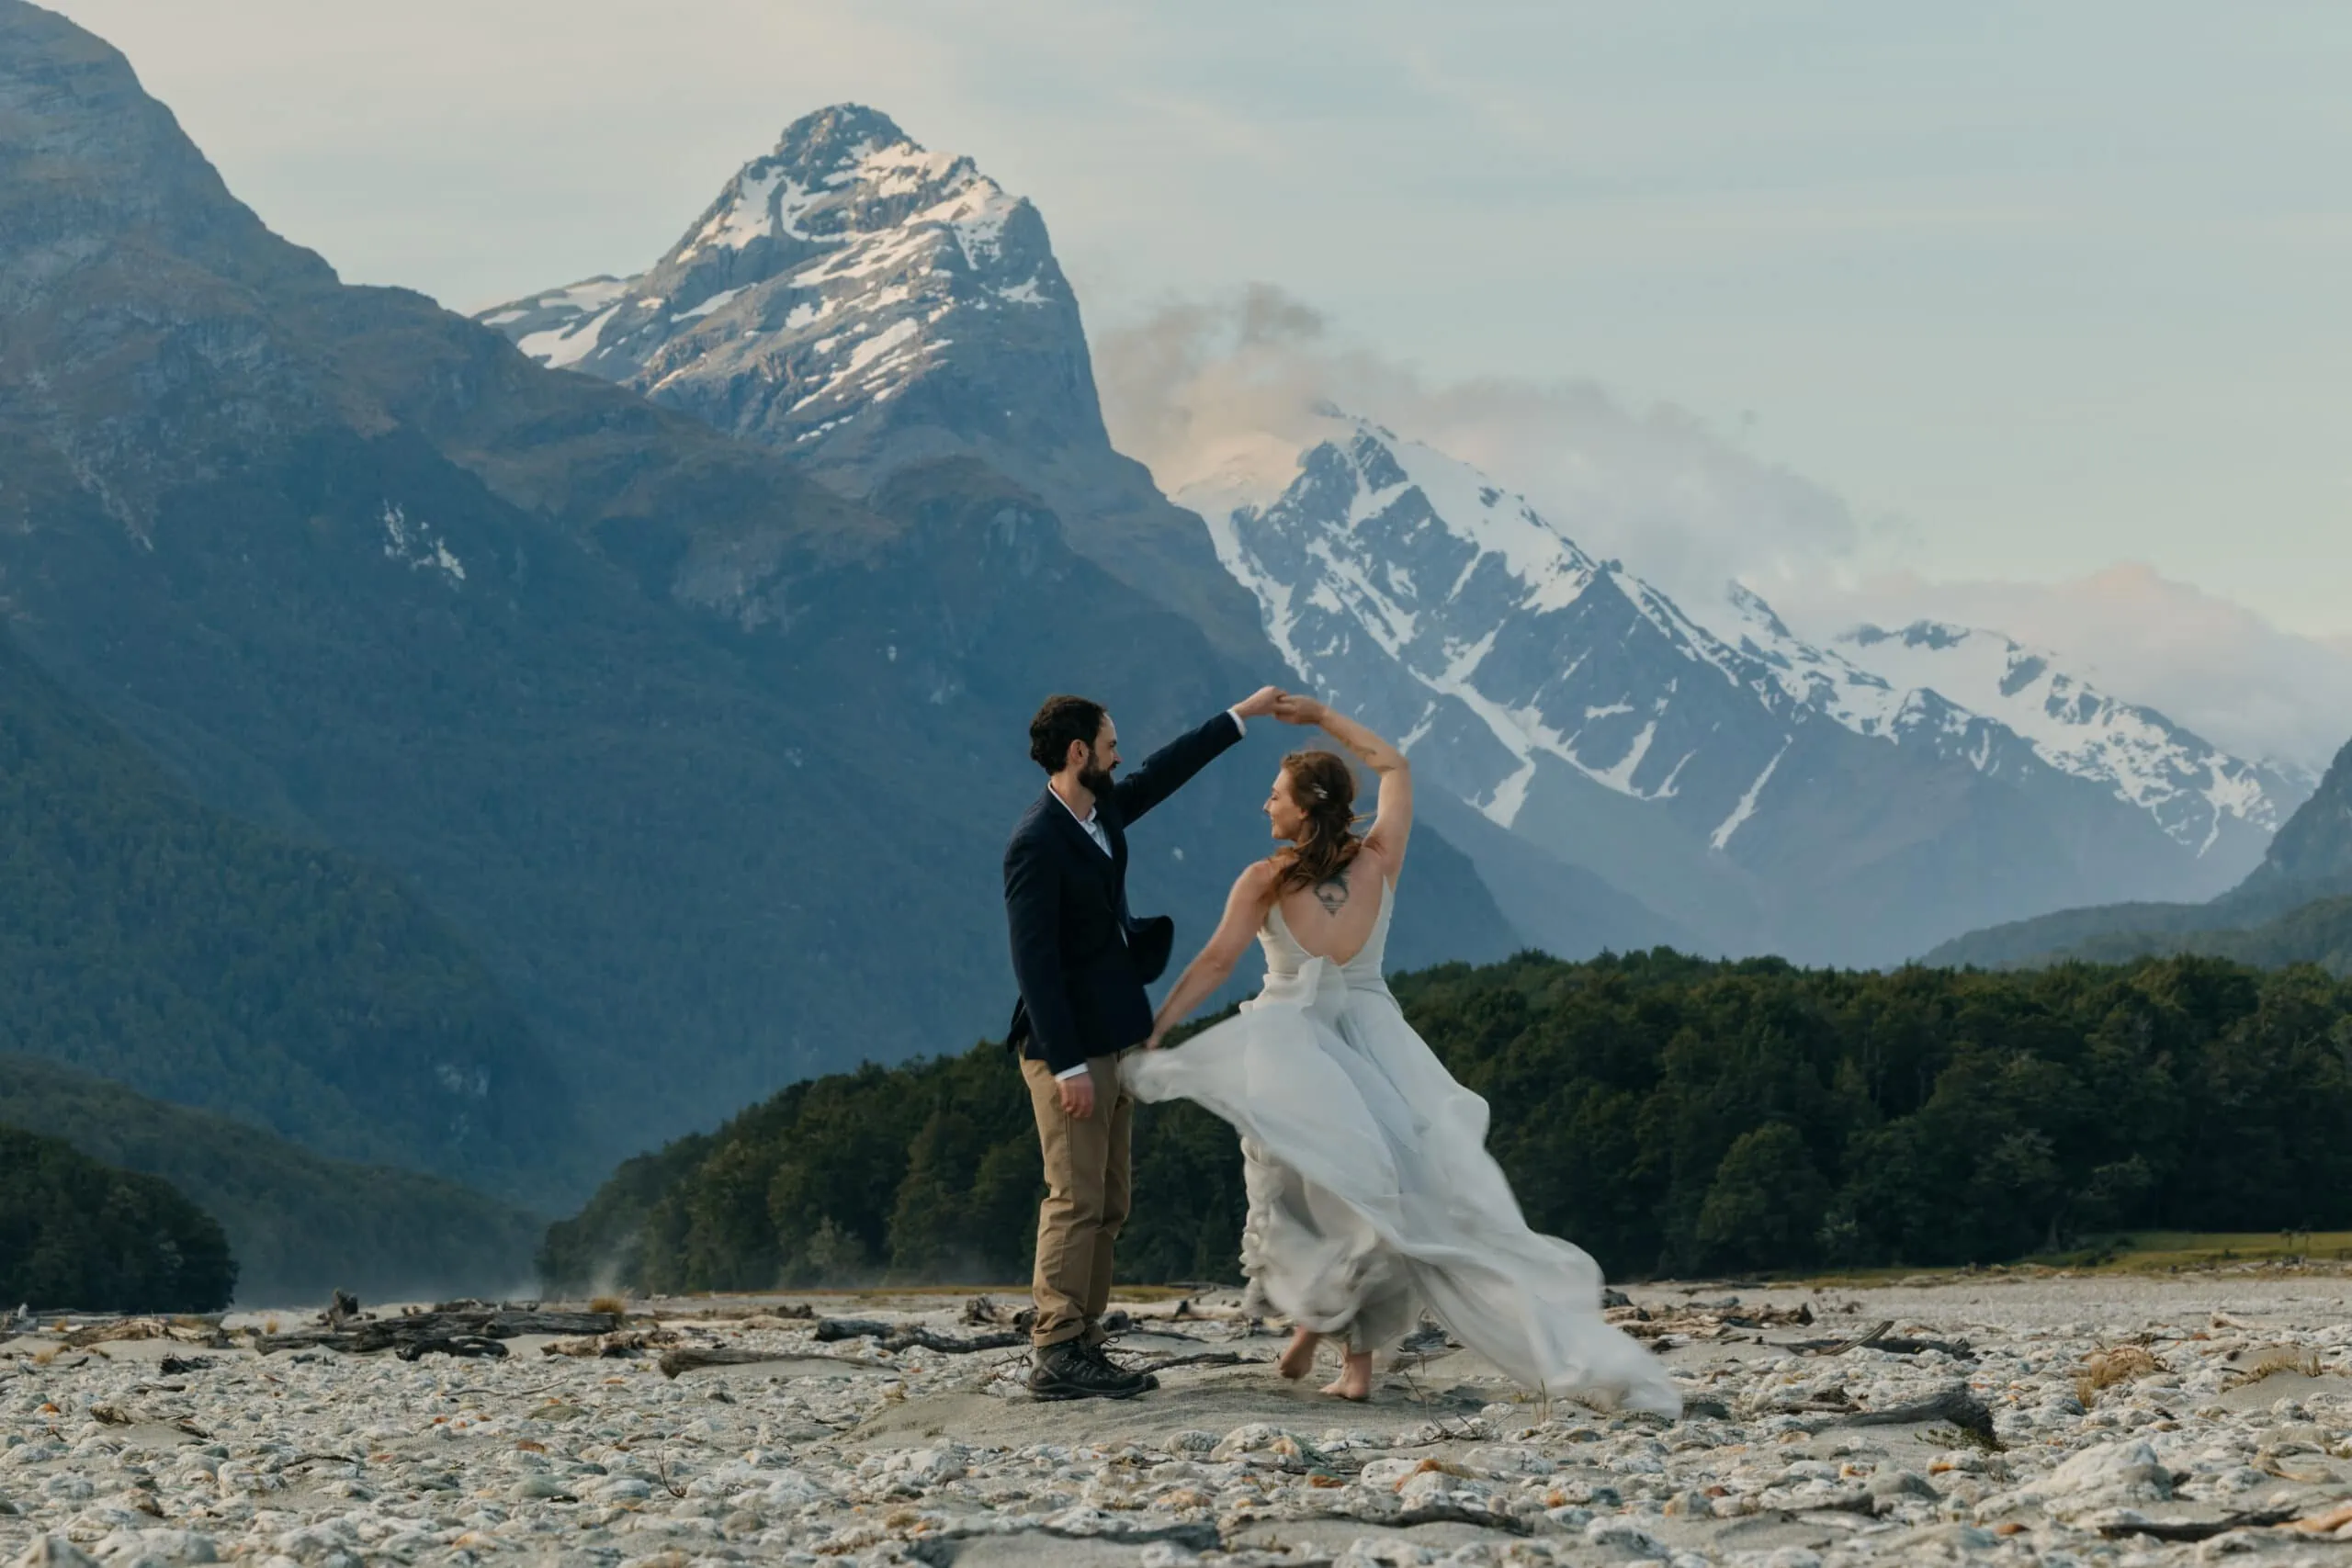 A couple dances by a river in the mountains of New Zealand.